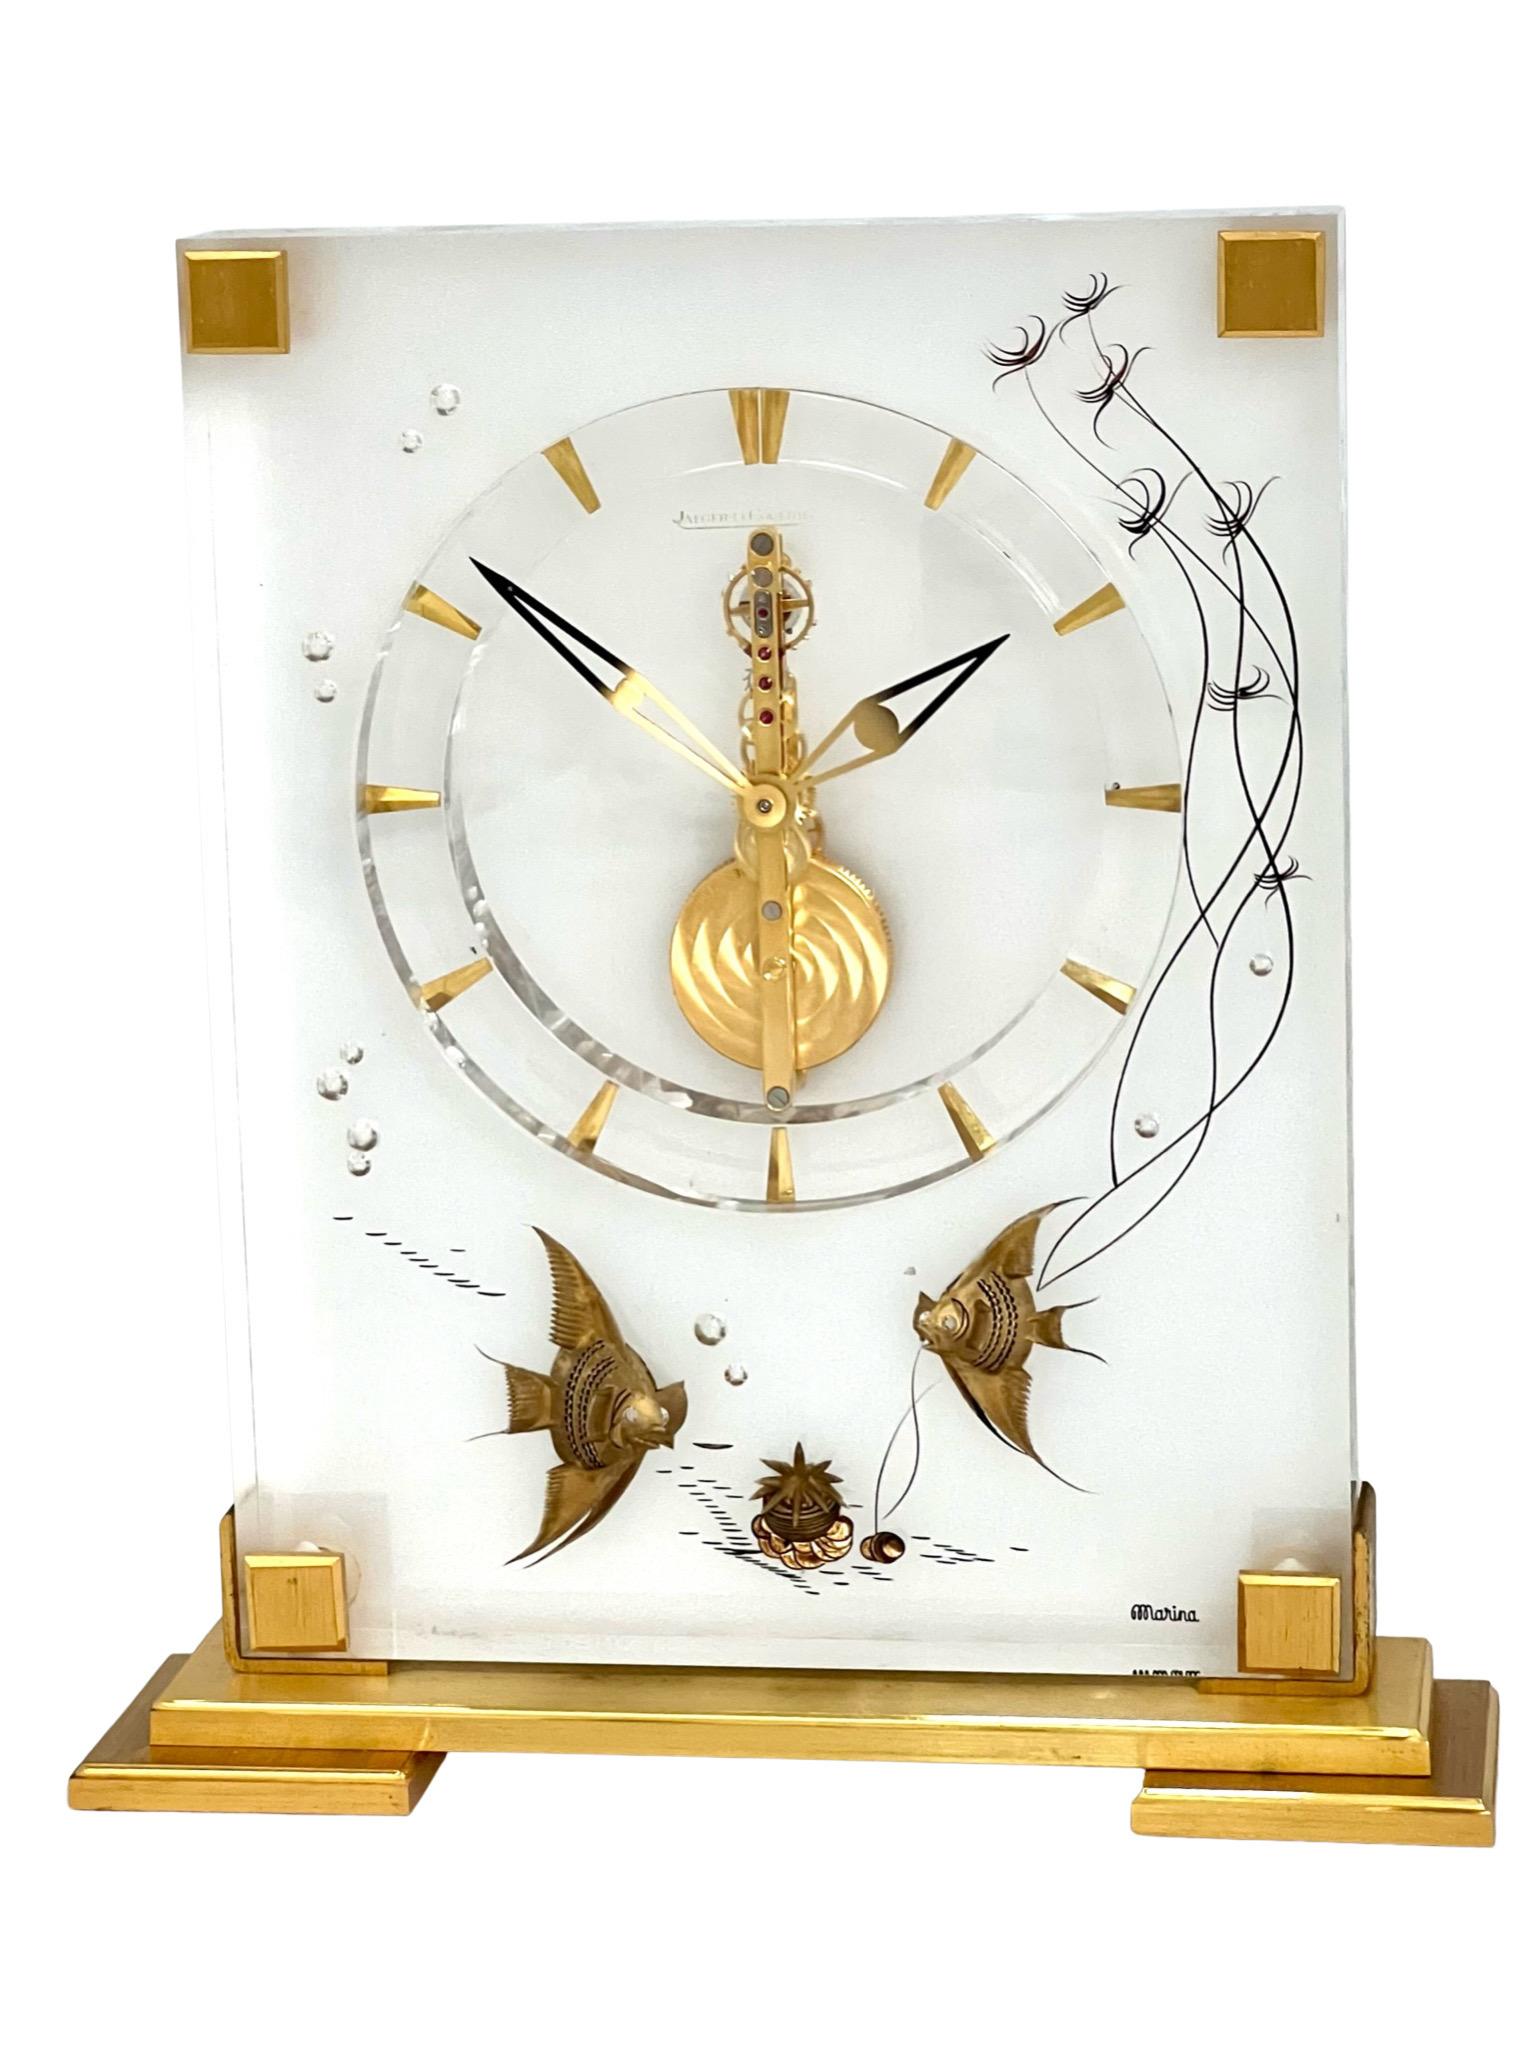 Stunning Jaeger LeCoultre mid-century marina desk clock with a Maritime theme, number 352. The clock has a polished gilt brass and lucite case. It is beautifully decorated with an underwater scene of fish and sea plants.

This delightful clock sits